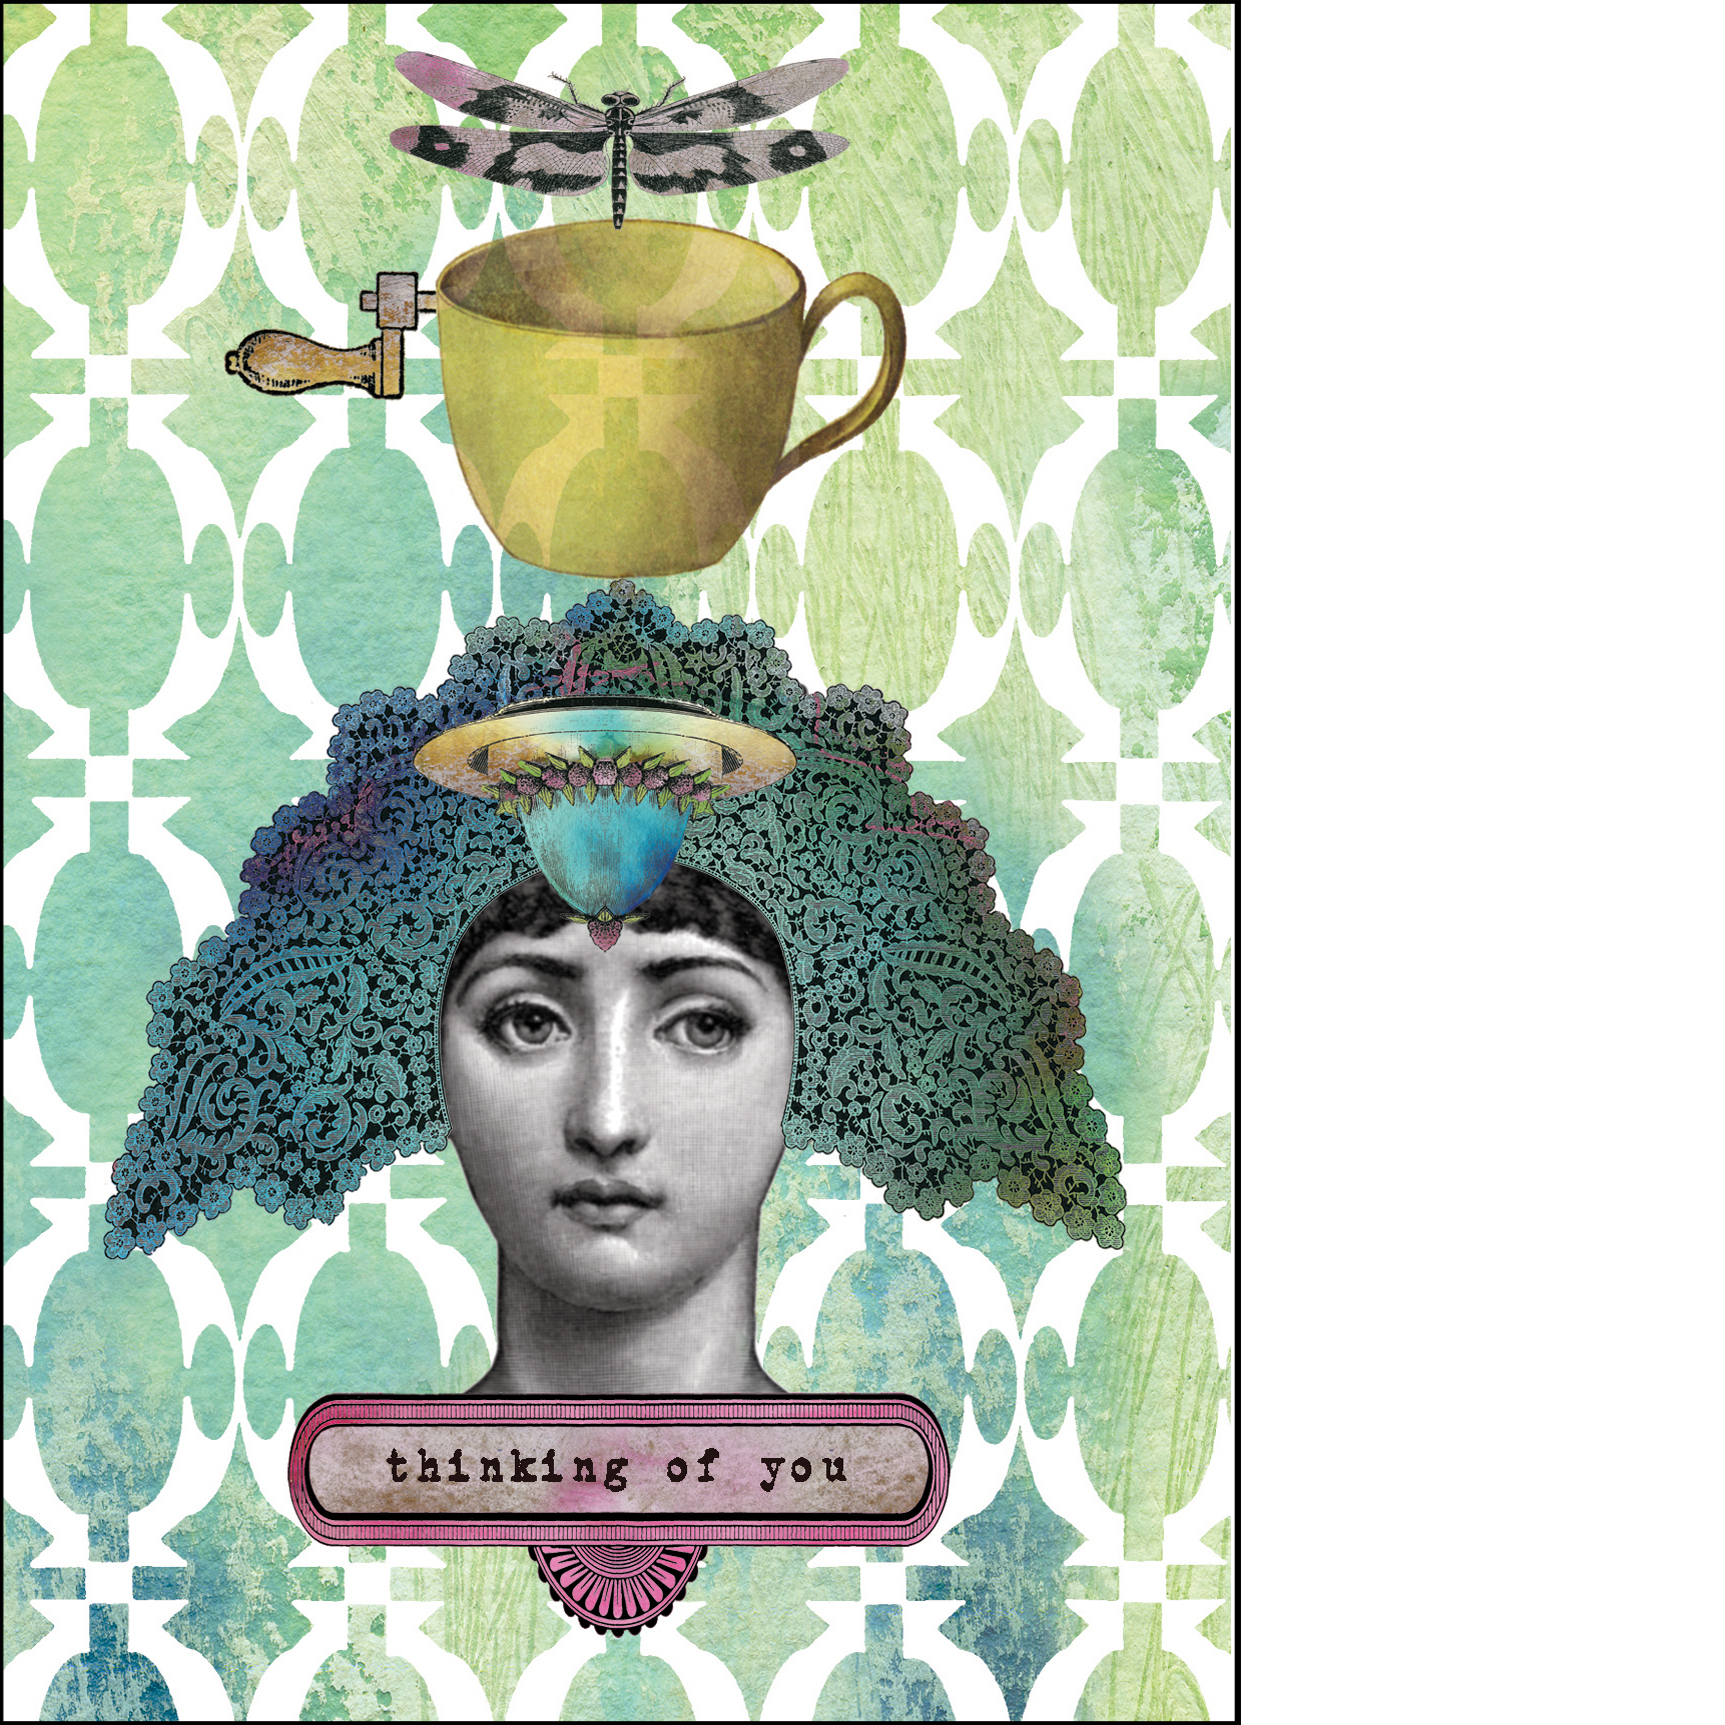 Gabriela Szulman collage greeting card "thinking of you" quirky woman with cup dragonfly on her head